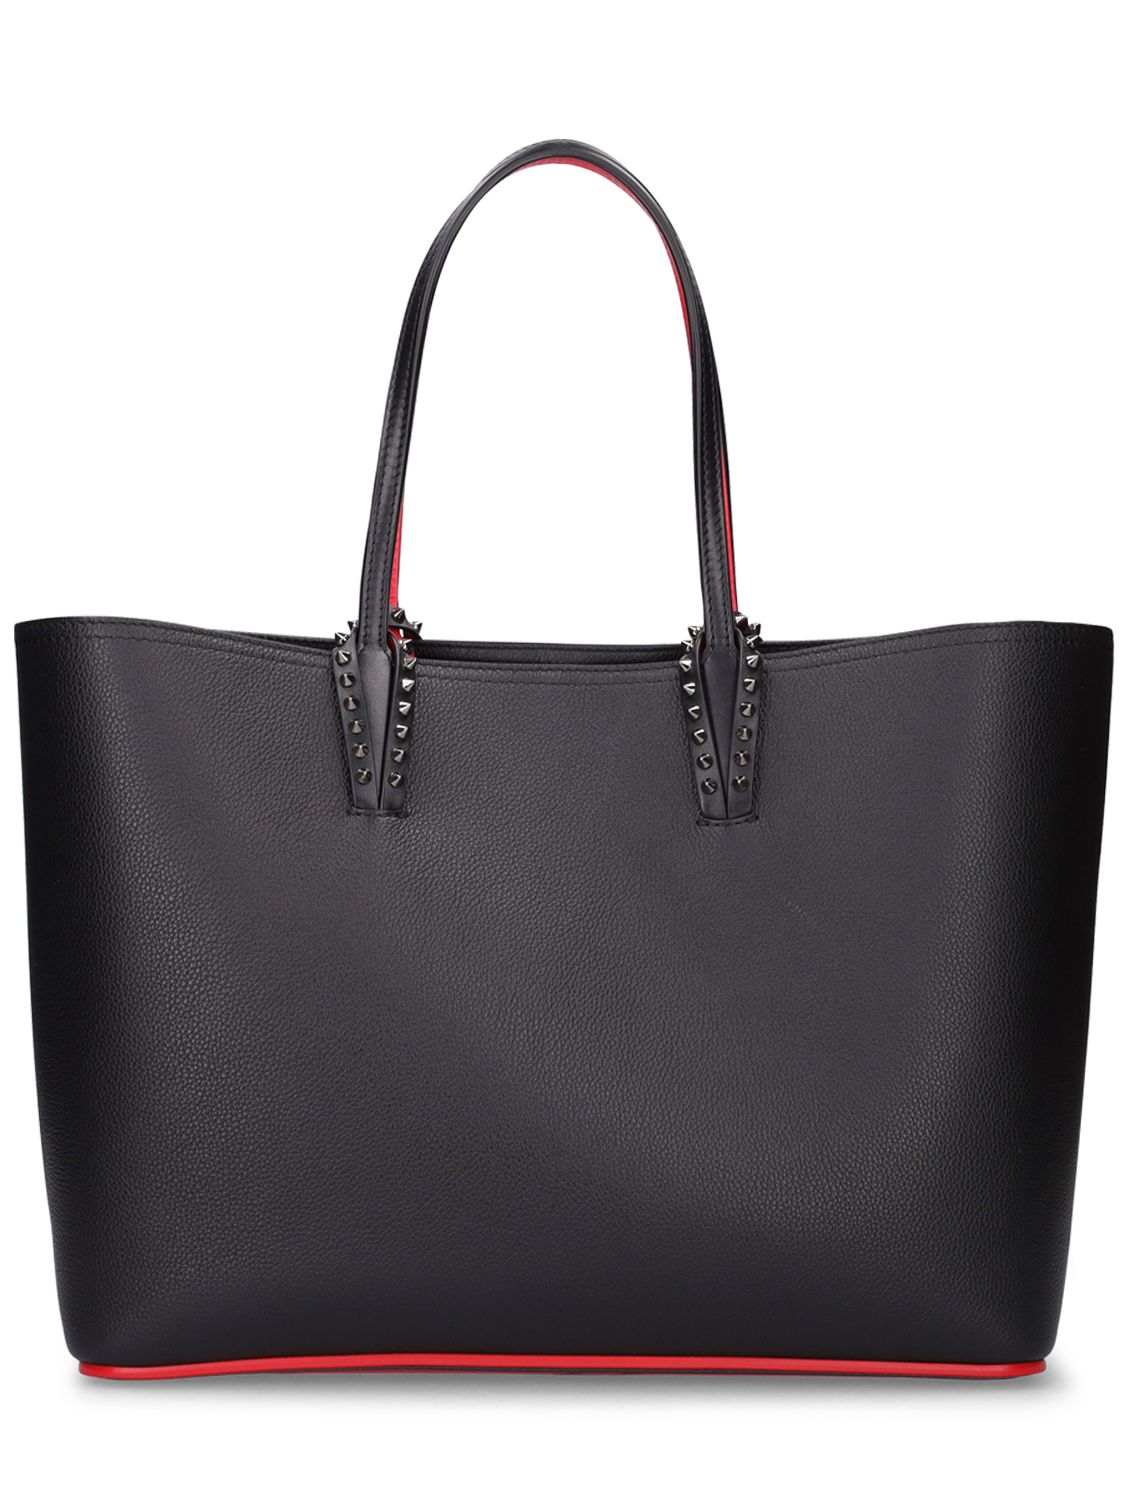 Cabata Grained Leather Tote Bag